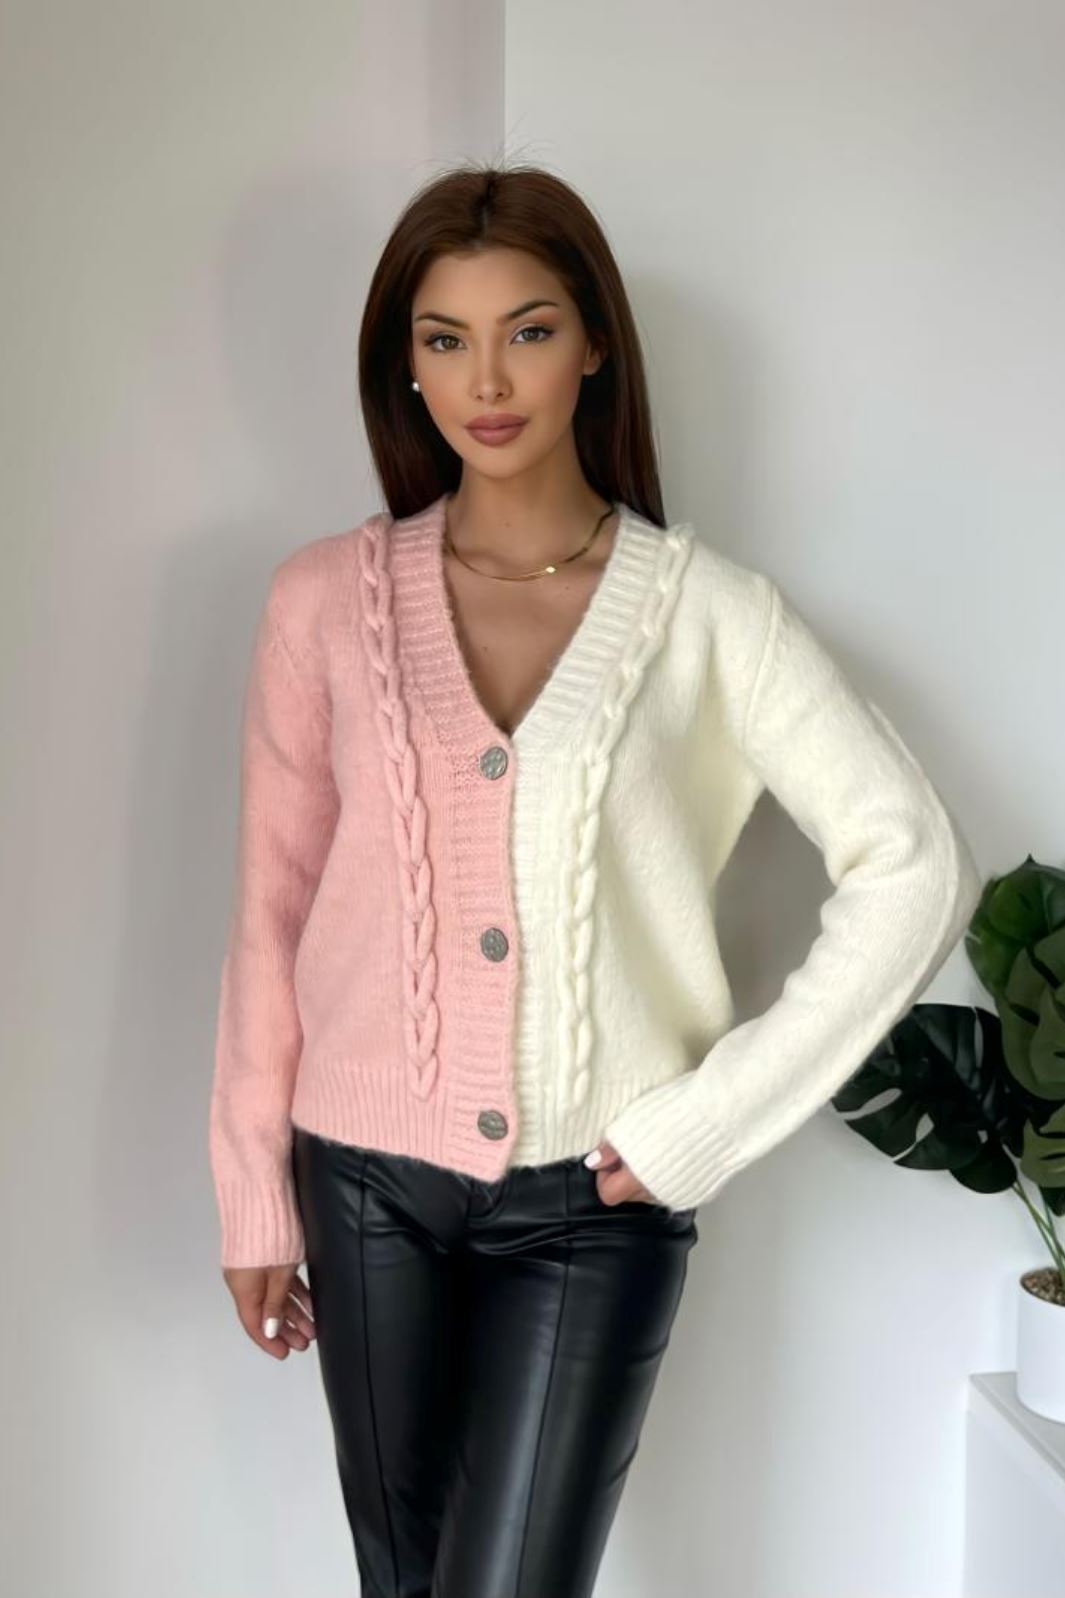 A-bee - Two-Tone Vest 383902 - Pink Cardigans 